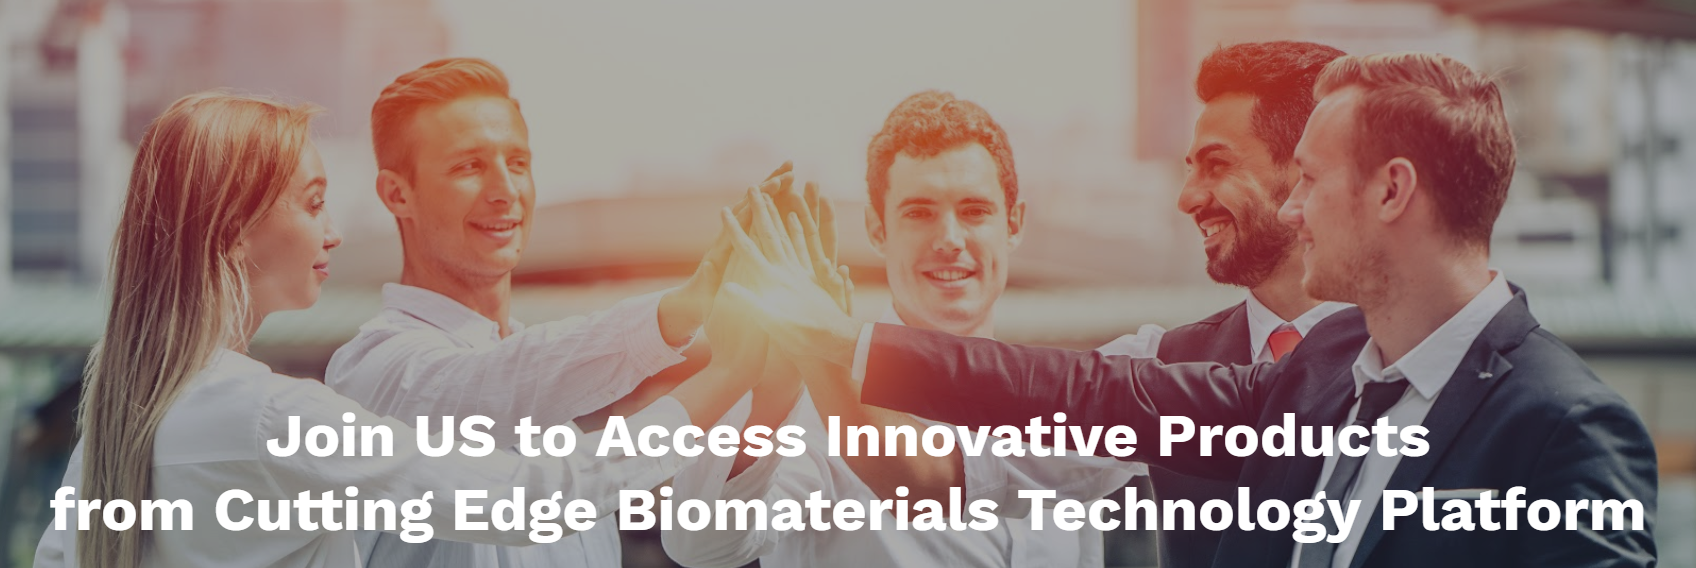 Join US to Access Innovative Products from Cutting Edge Biomaterials Technology Platform